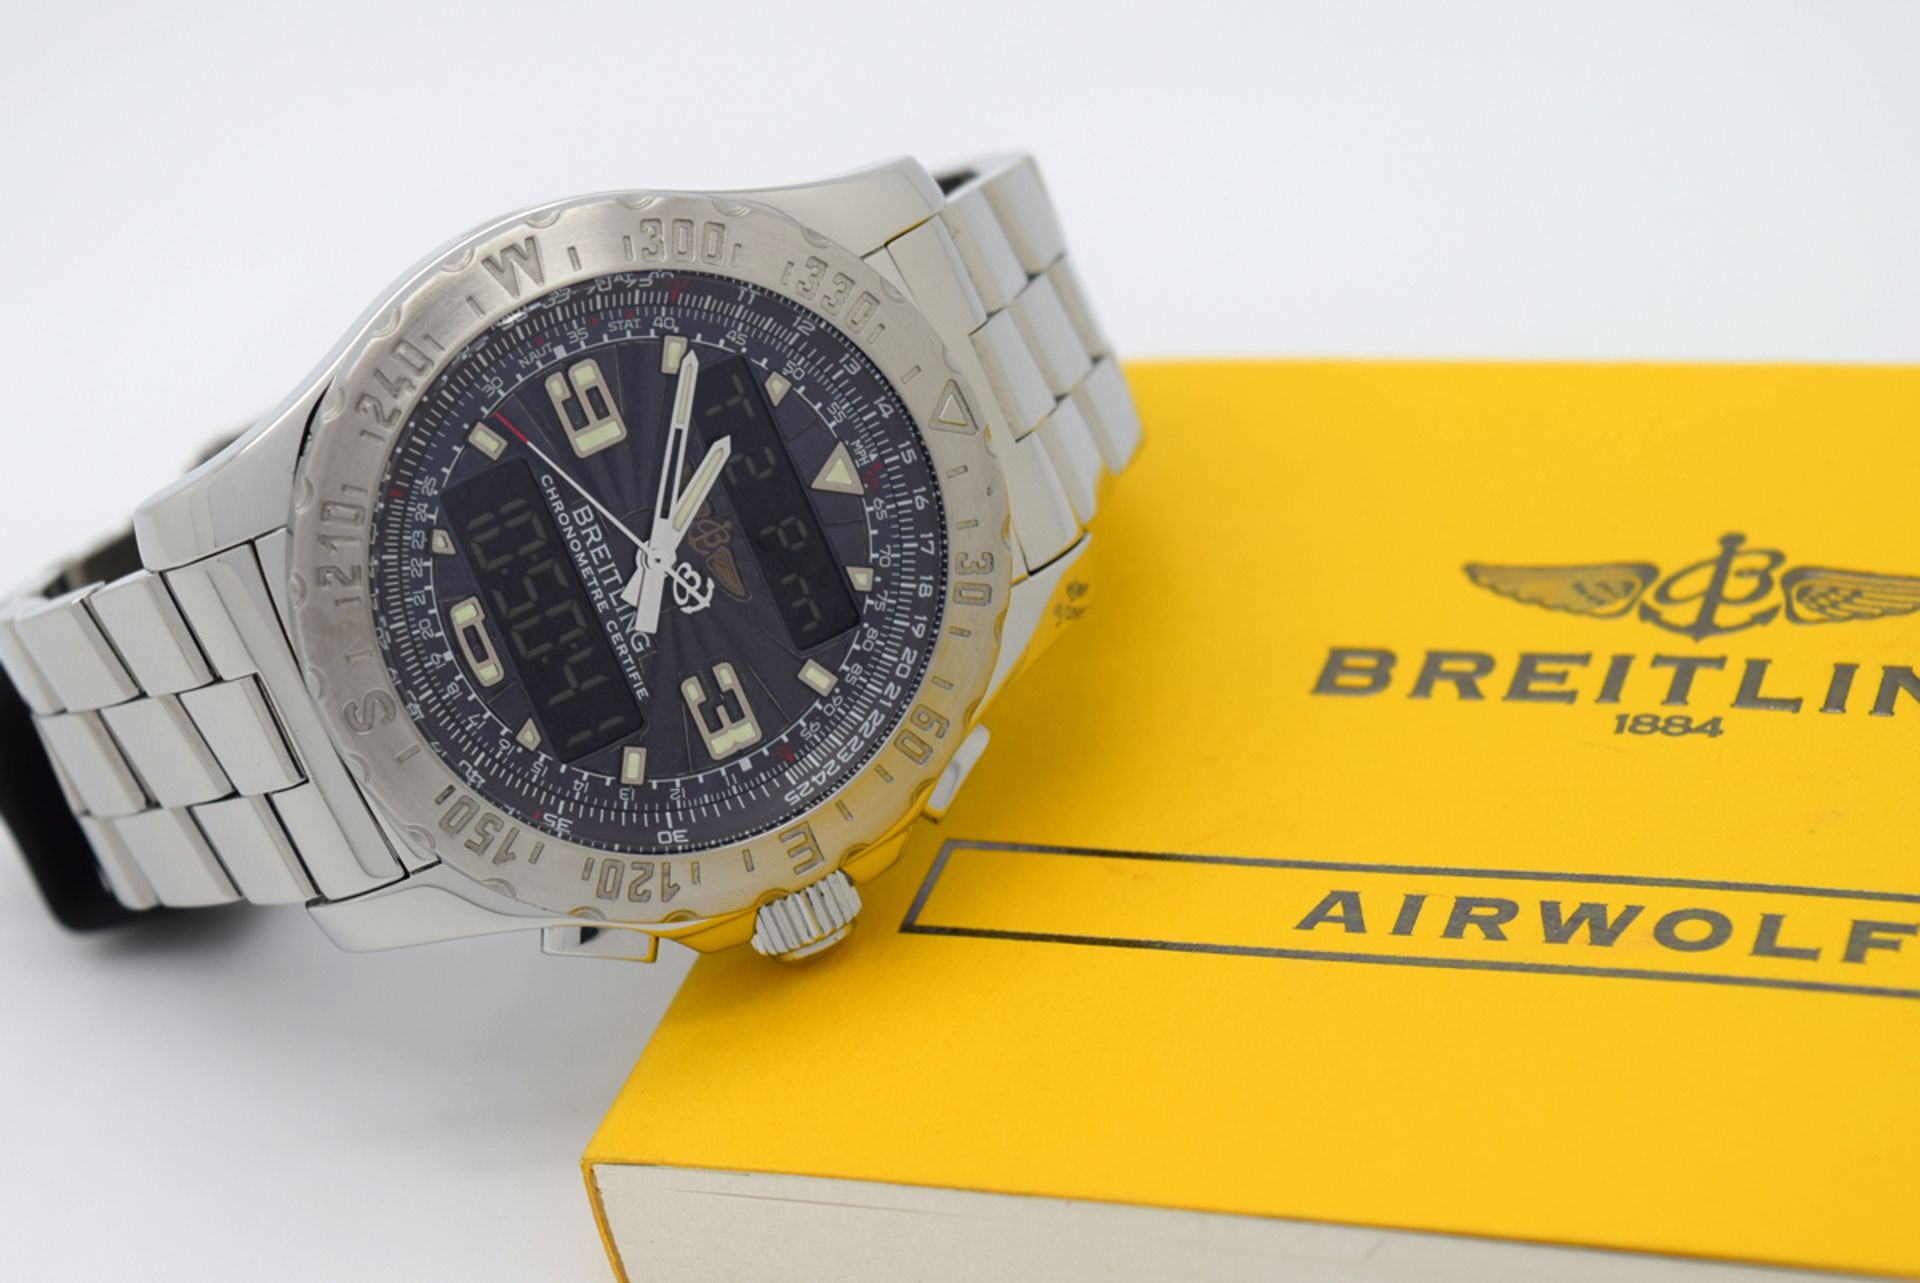 BREITLING AIRWOLF 'PROFESSIONAL' (A78363) - SLATE BLUE DIAL - Image 7 of 9